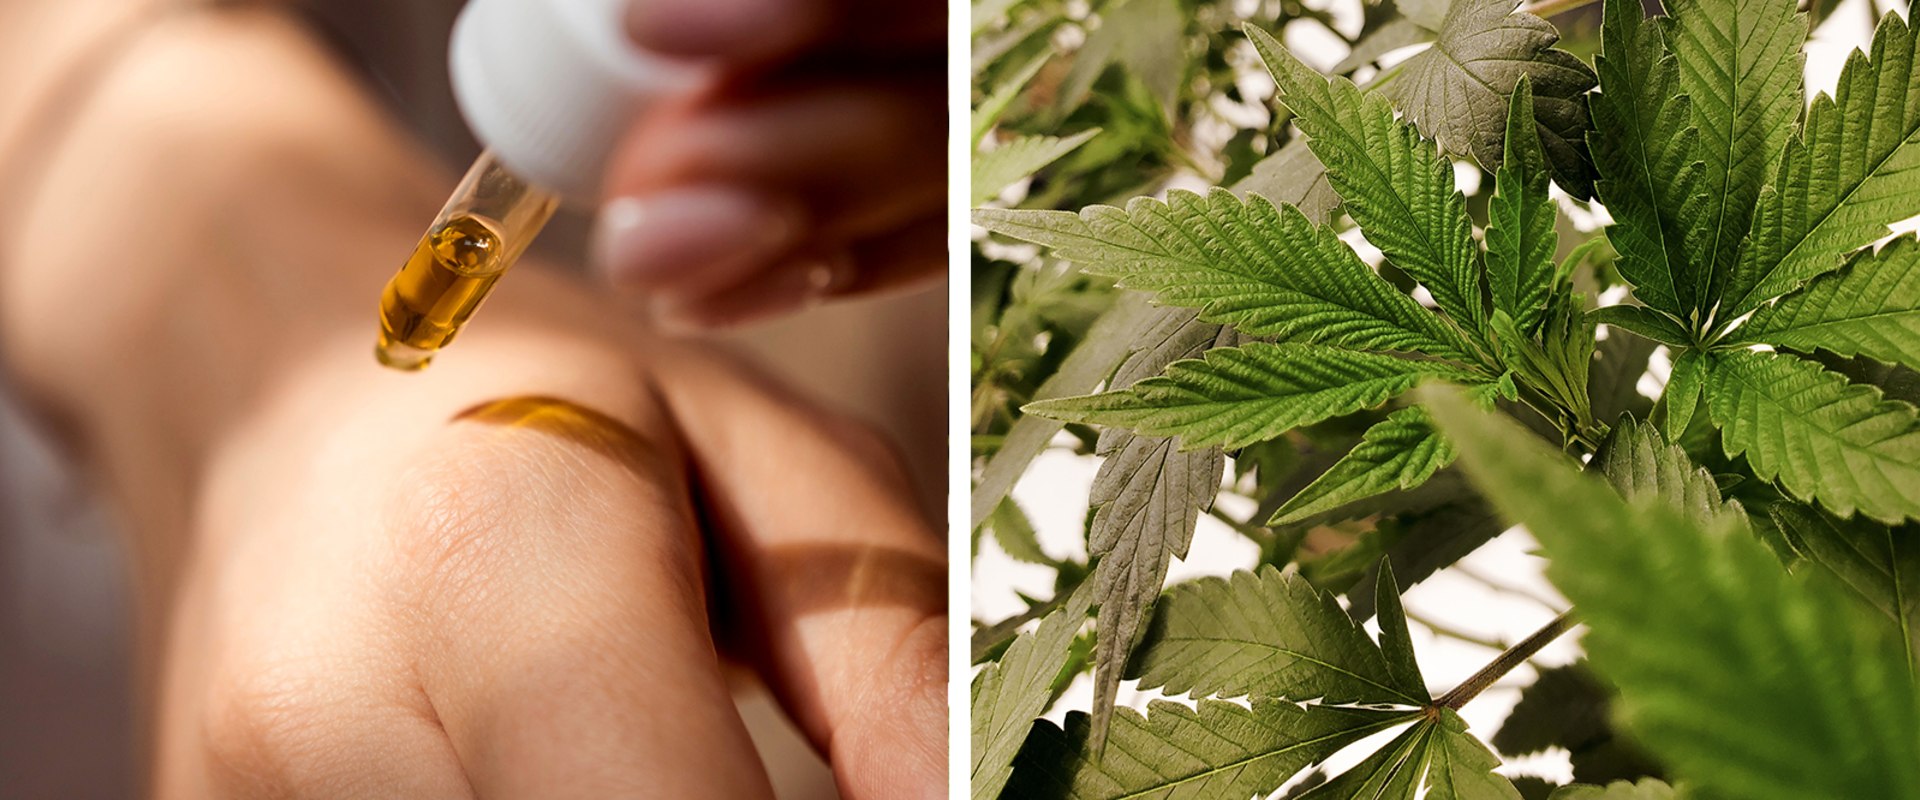 The Healing Power of CBD: What You Need to Know